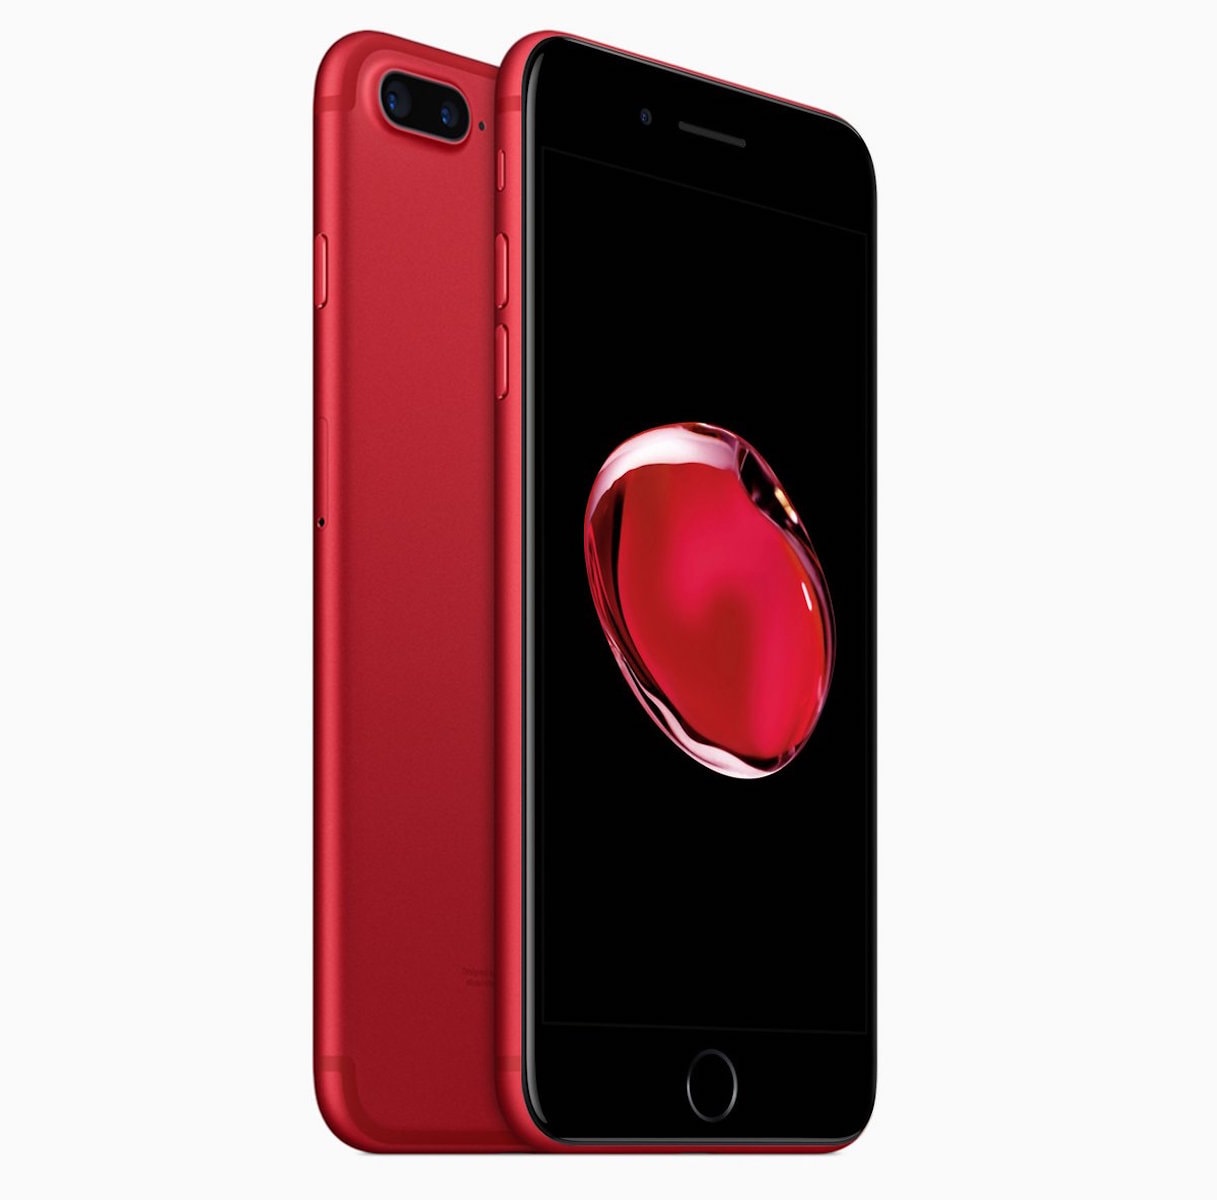 iPhone 7 (PRODUCT)RED Unboxing